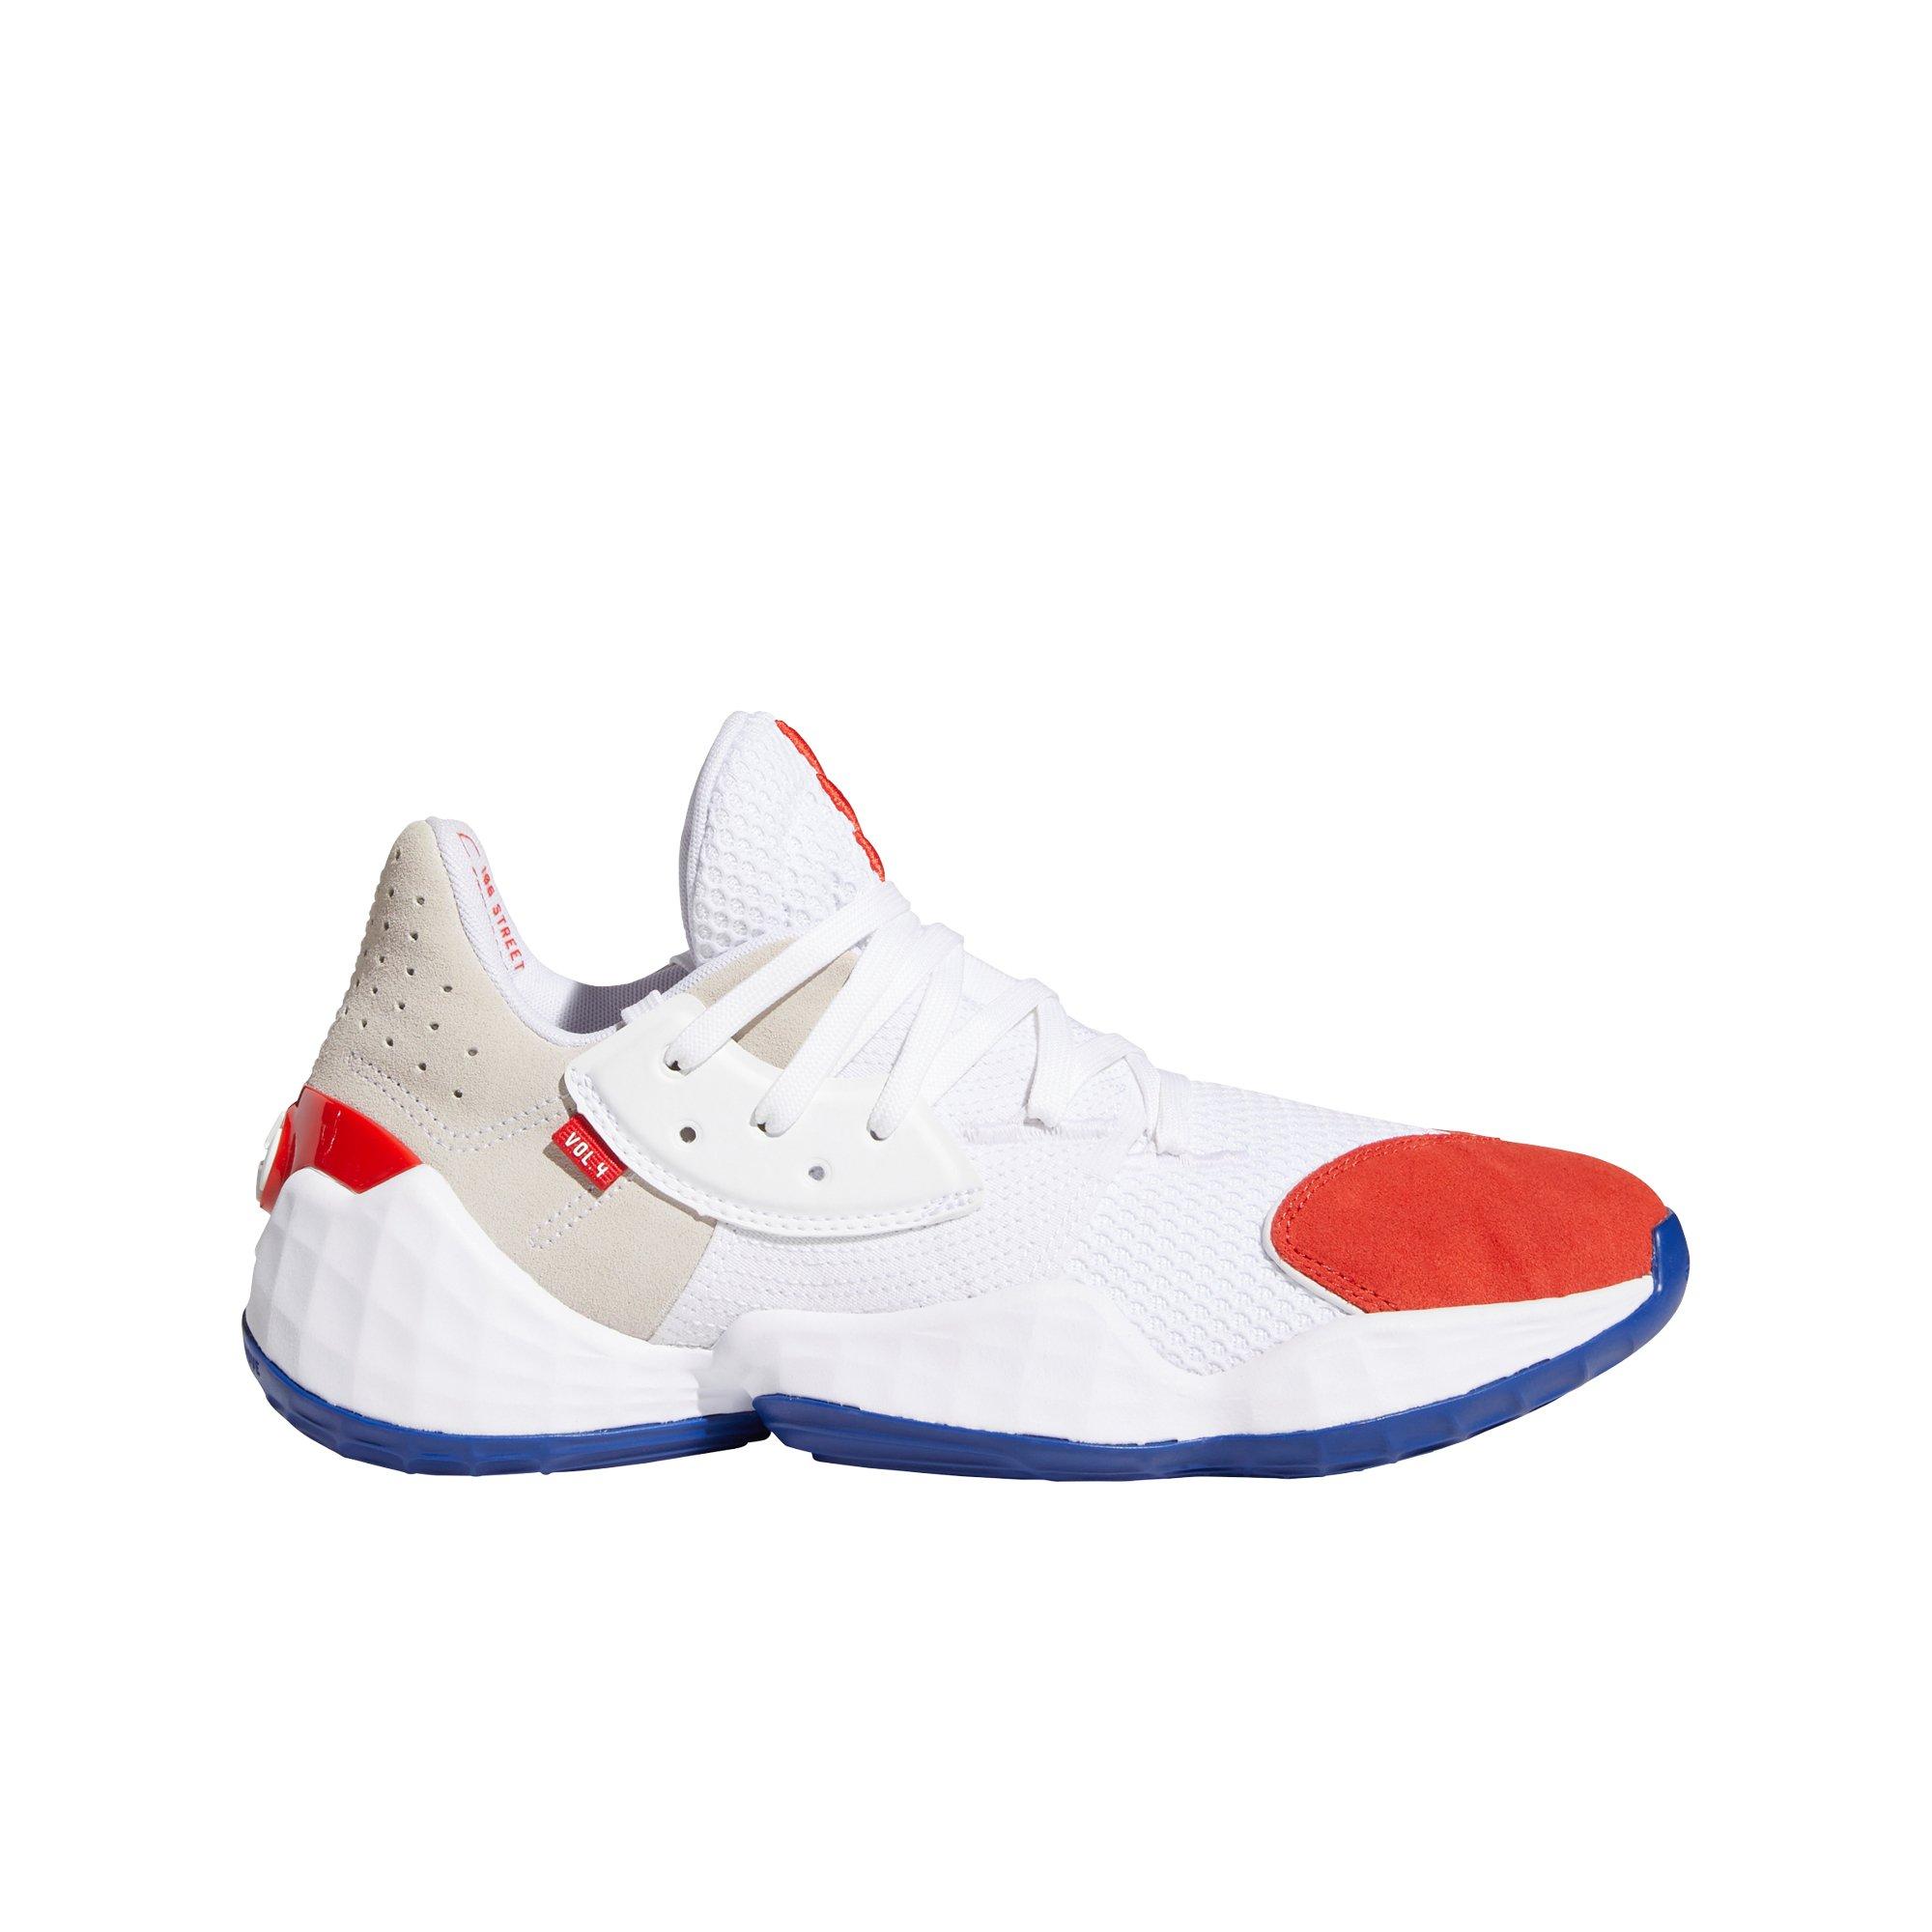 red white and blue adidas basketball shoes